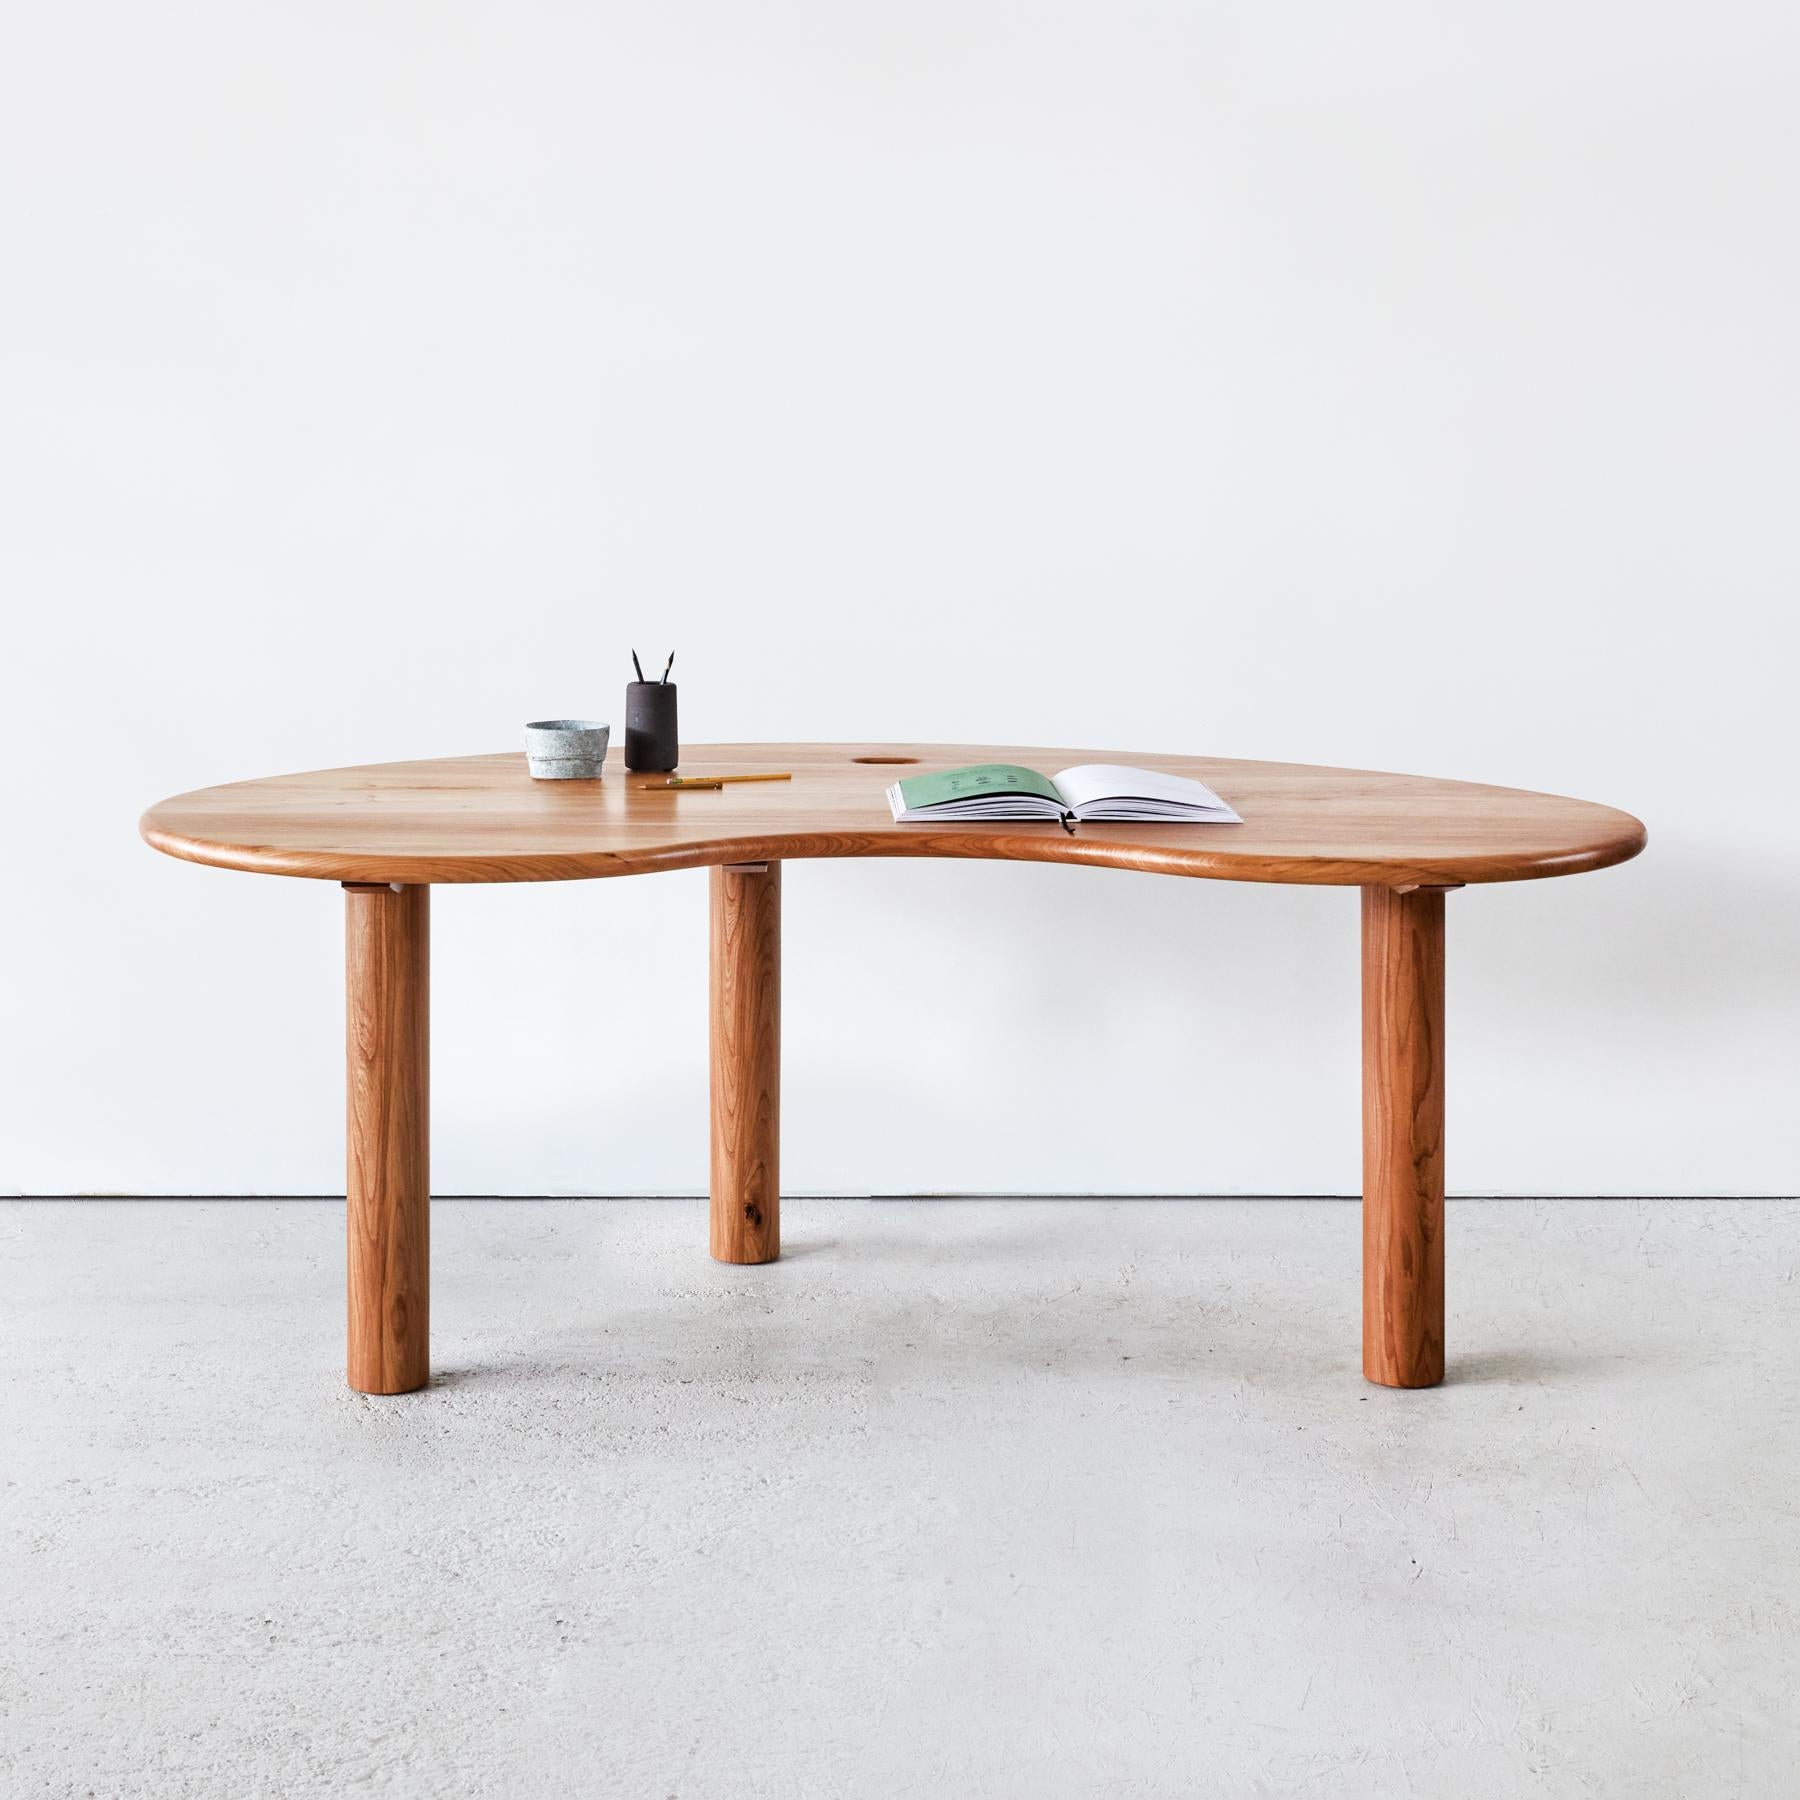 Inspired by organic forms, the Broadleaf desk is handcrafted from solid British wood. The desk combines gentle curves with a playful three-legged base, creating a dynamic sense of movement.

With removable cylindrical legs, the desk can be easily